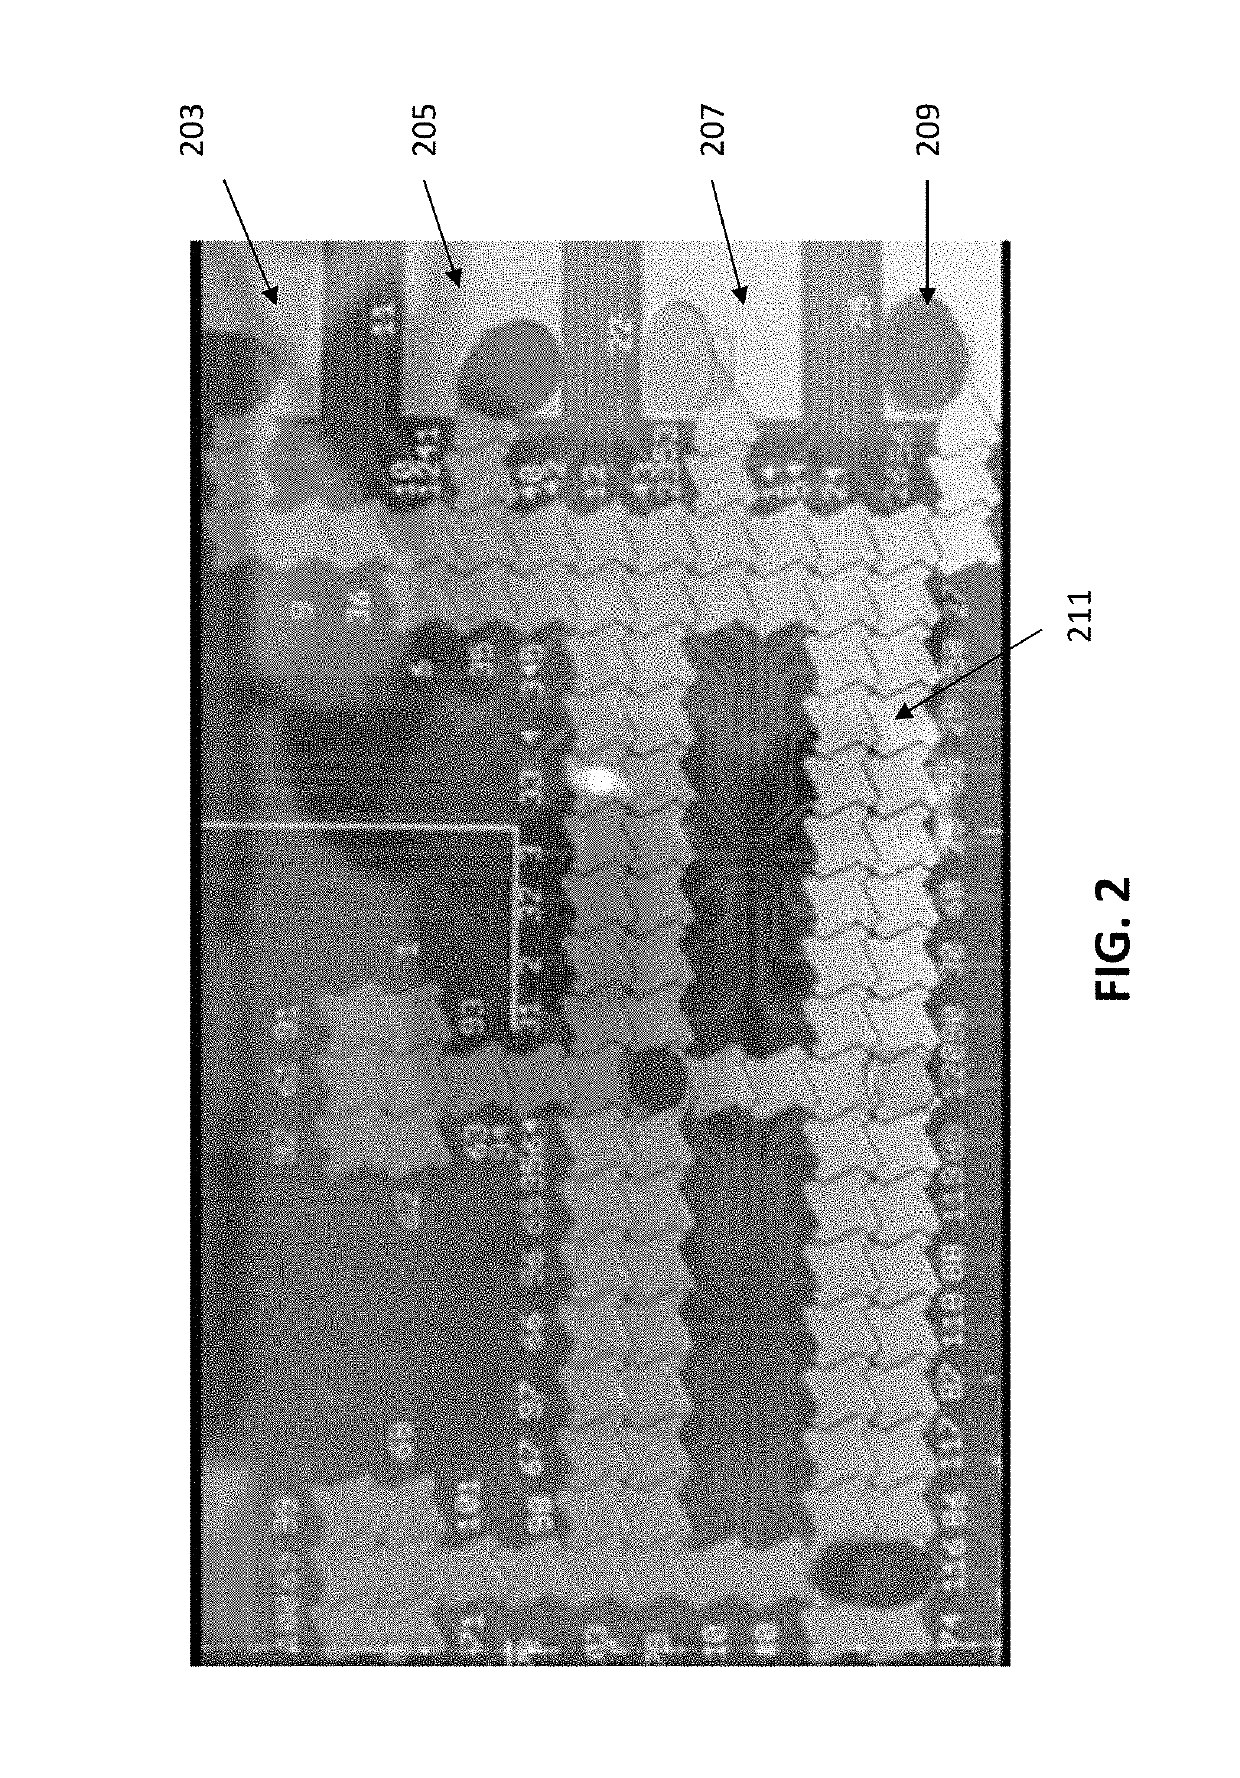 Digital microfluidics devices and methods of using them